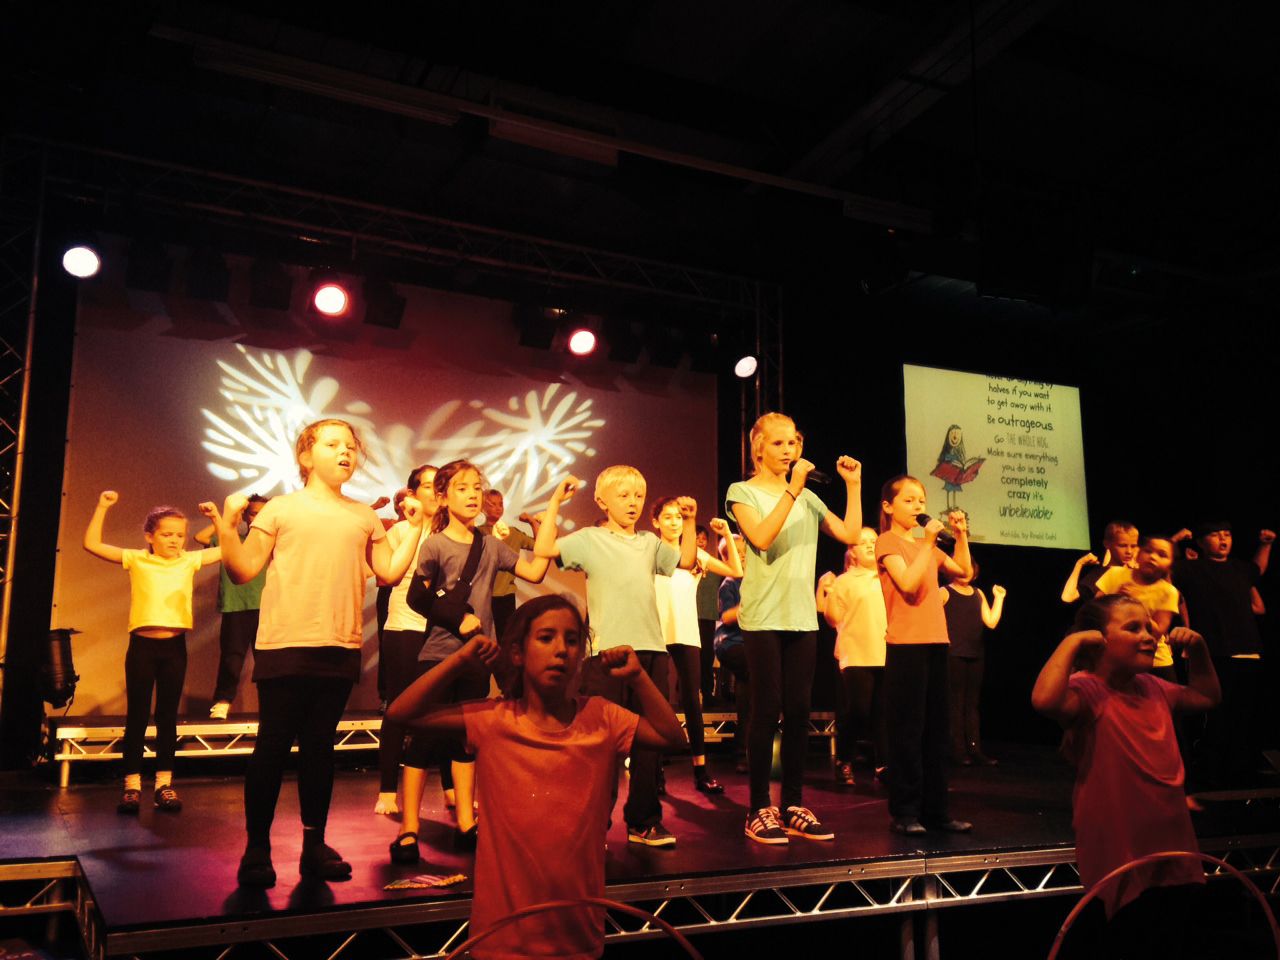 ‘Infectious’ energy and enthusiasm: church children sang and danced for children's hospice